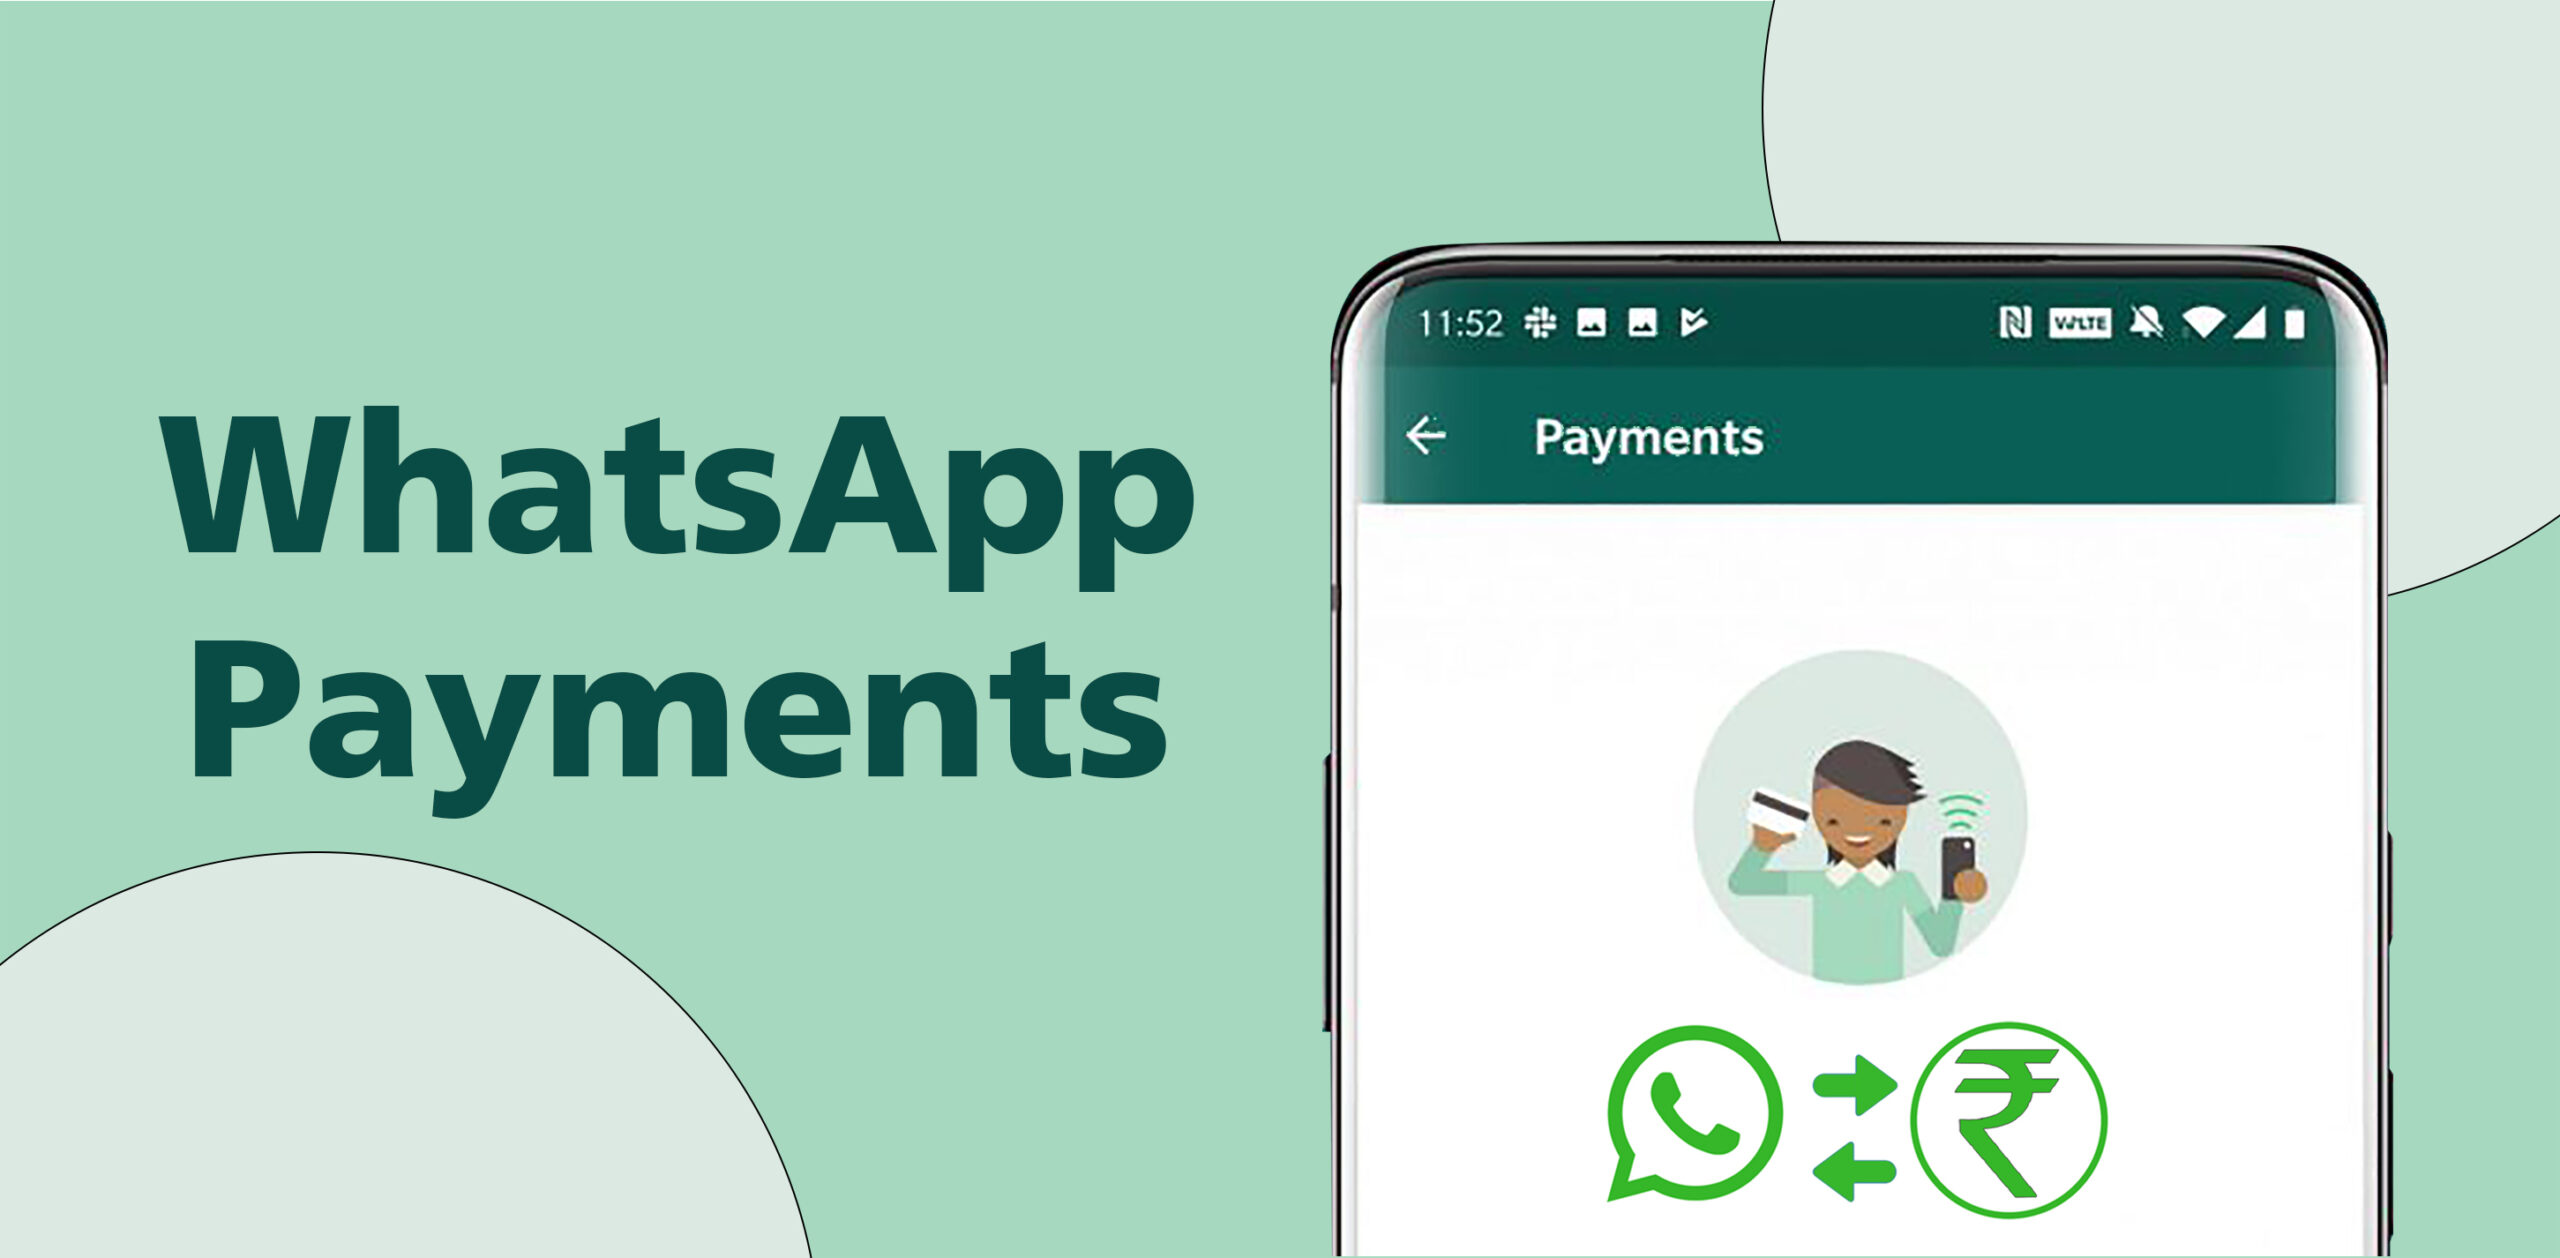 How To Set Up WhatsApp Pay and Make Payments